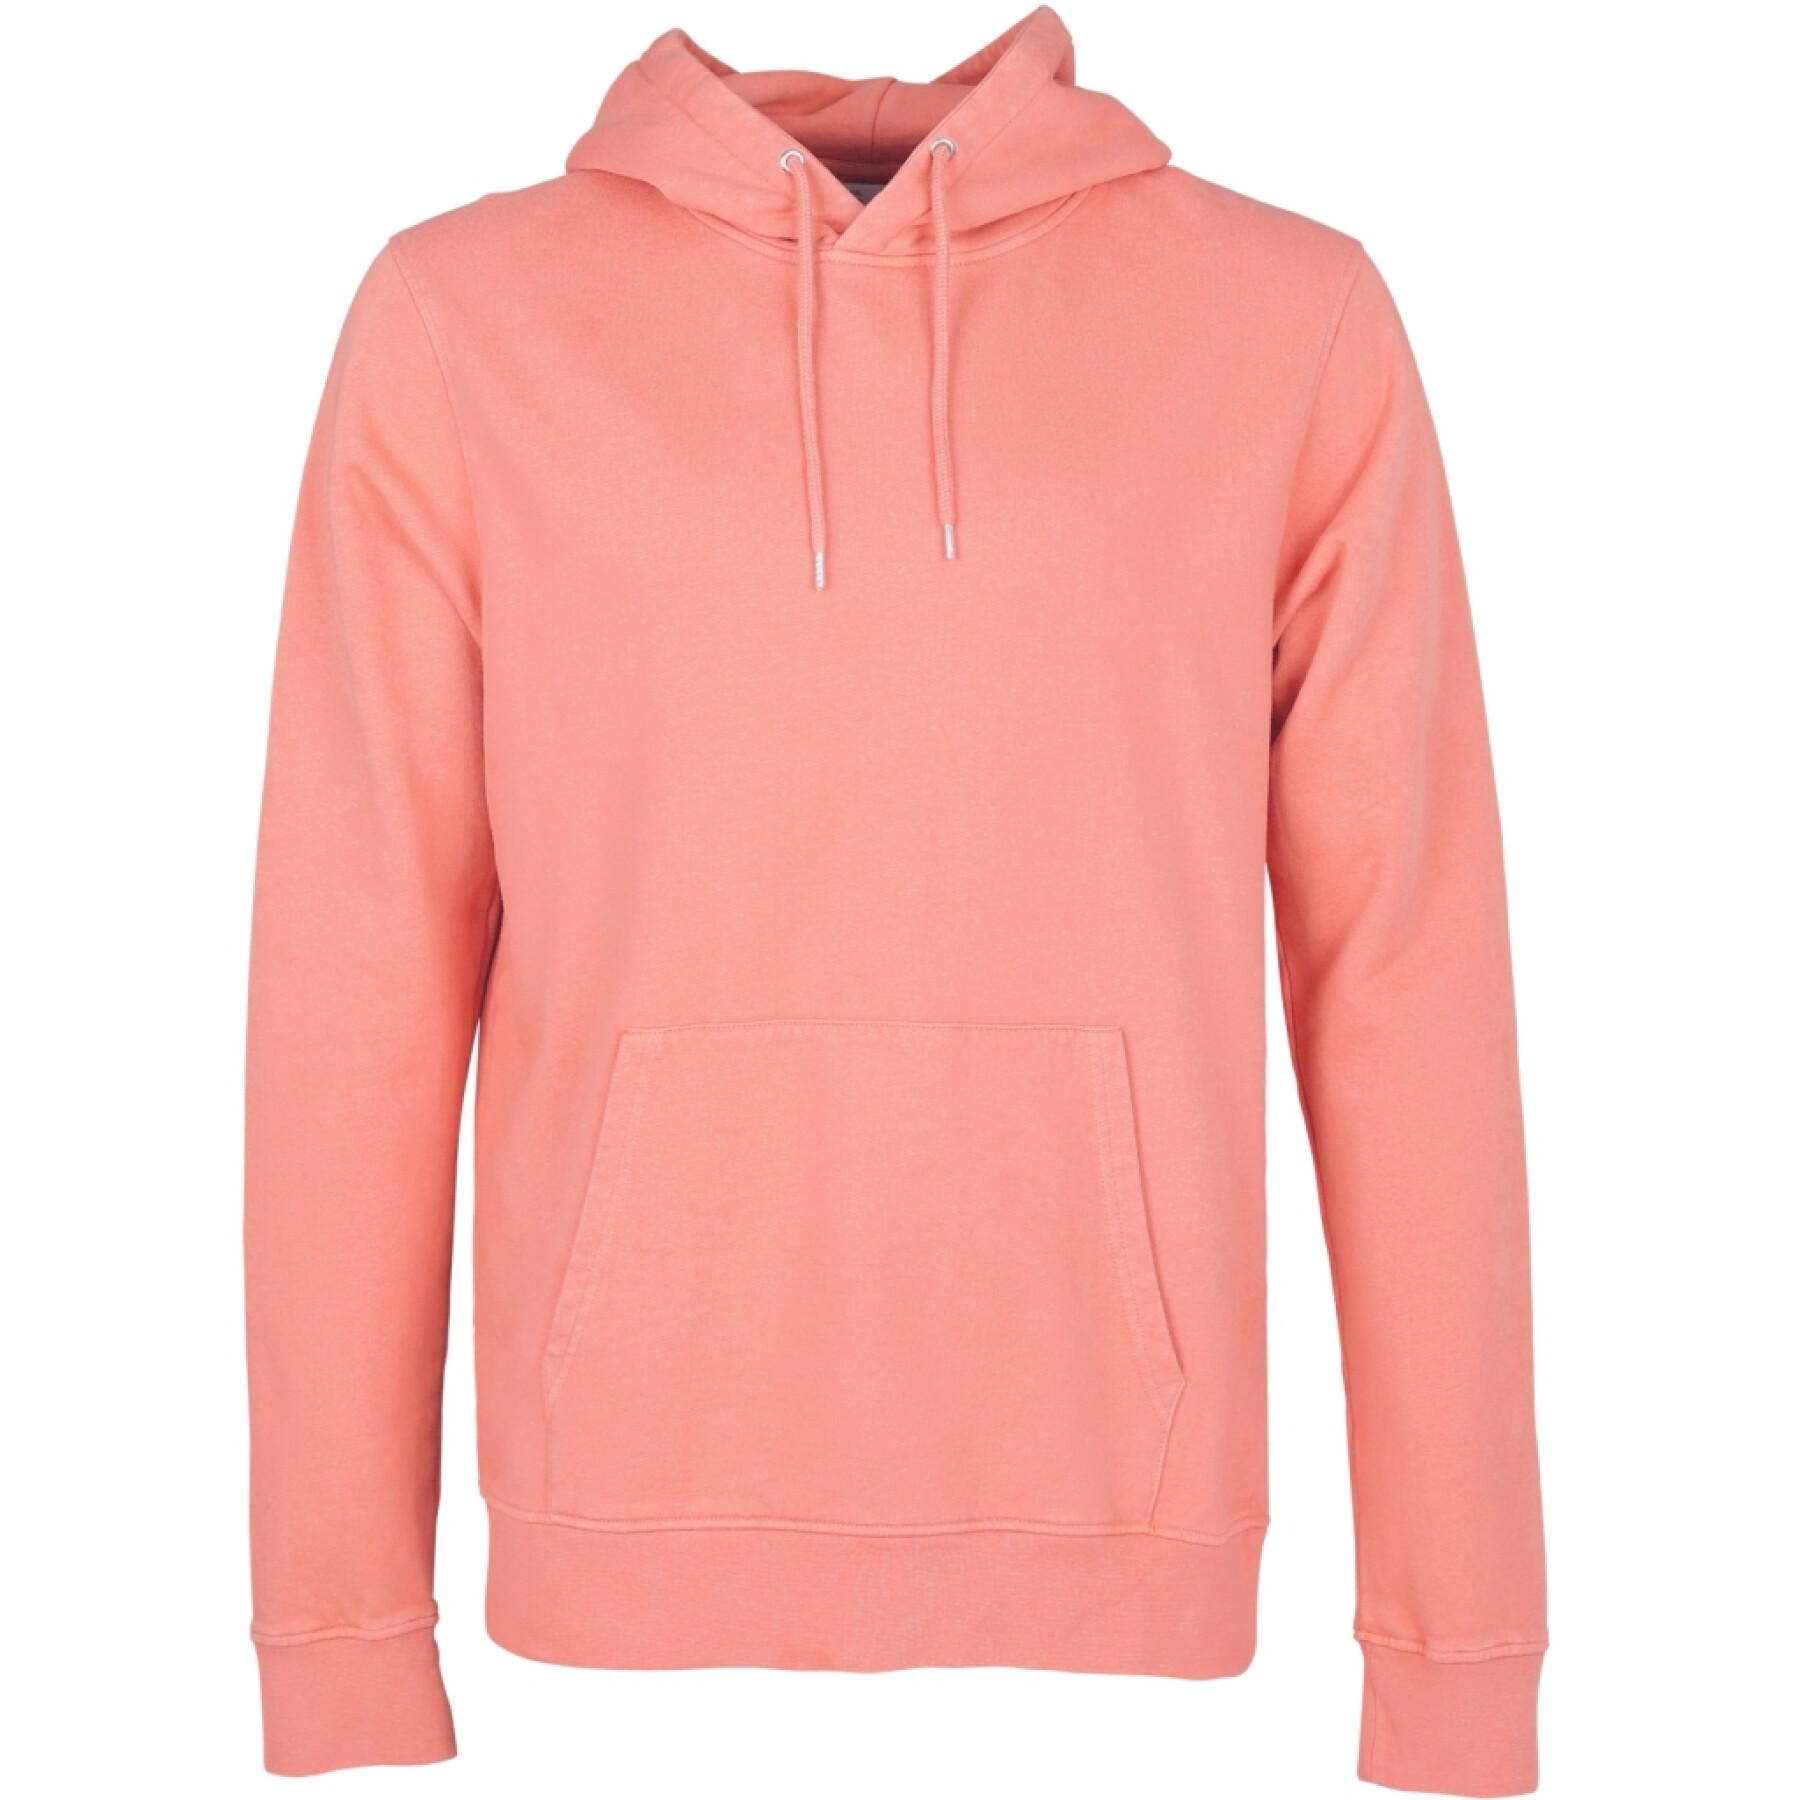 Hooded sweatshirt Colorful Standard Classic Organic bright coral